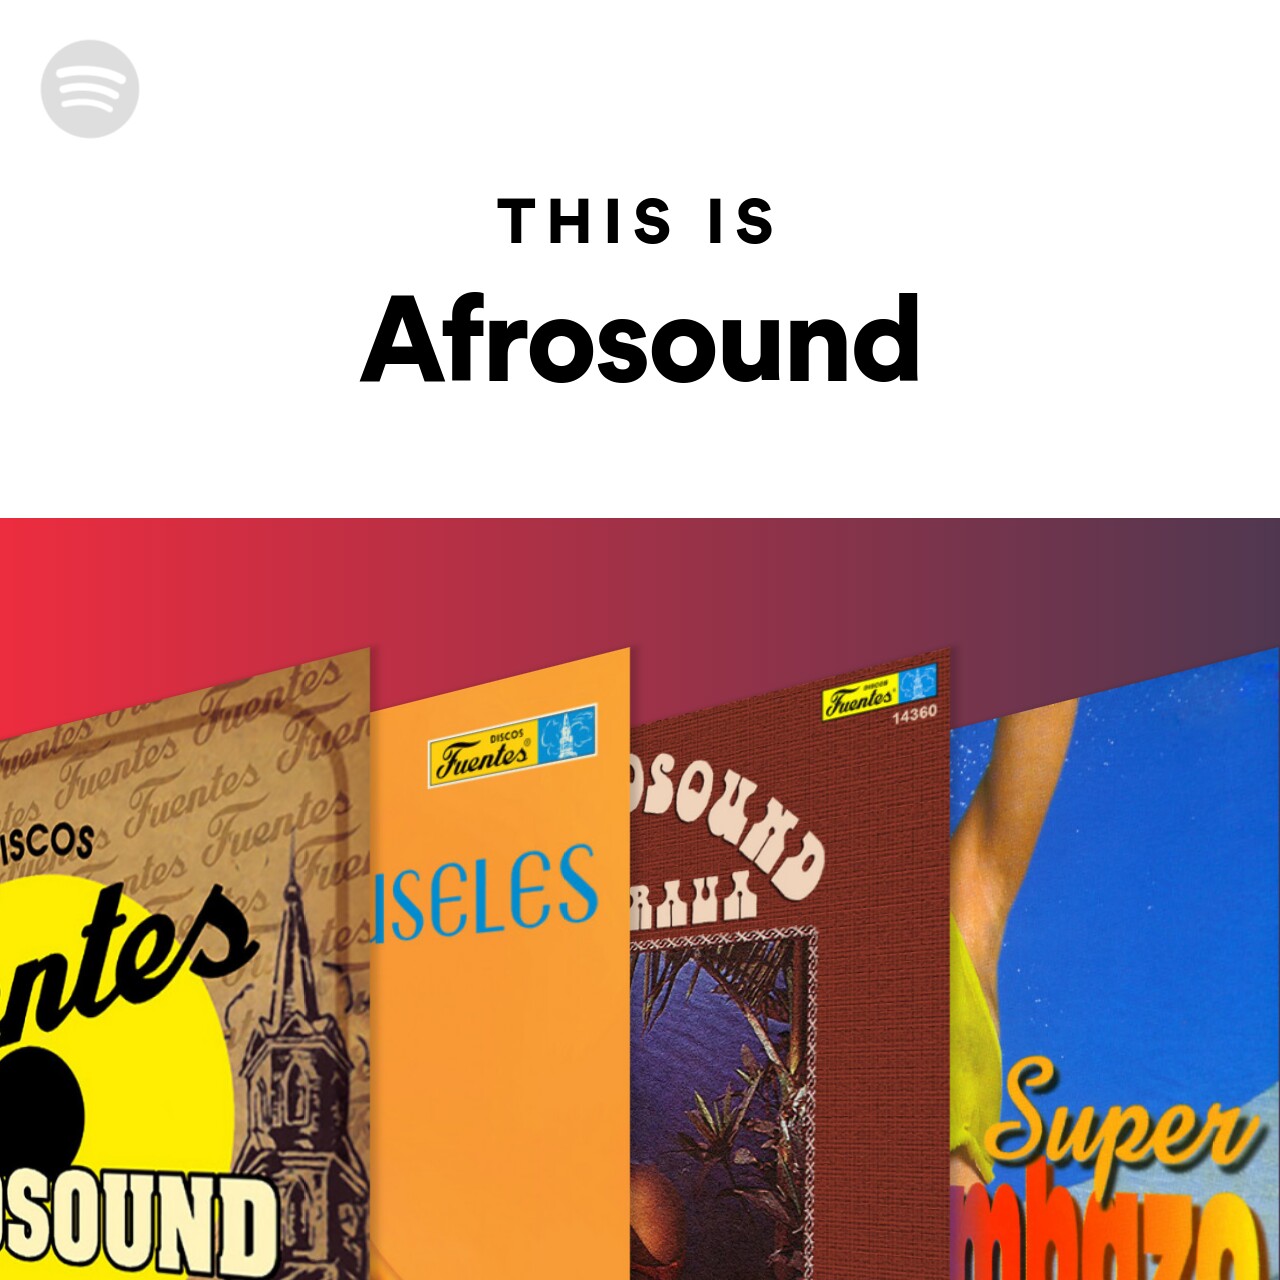 This Is Afrosound